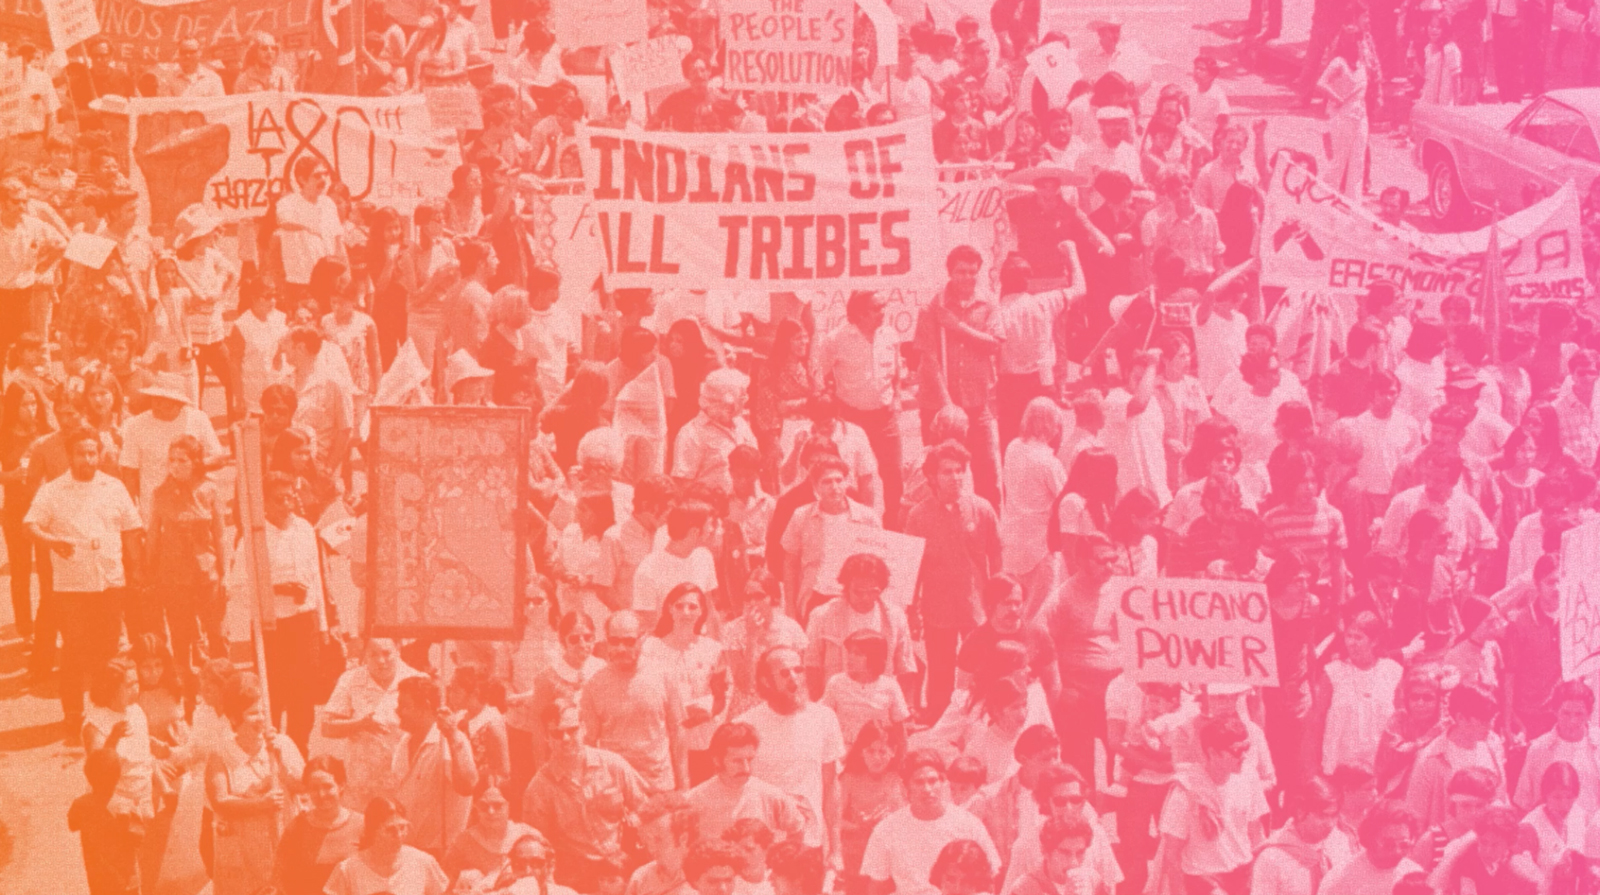 An archival image of Chicano protestors with a orange and pink gradient layered over it